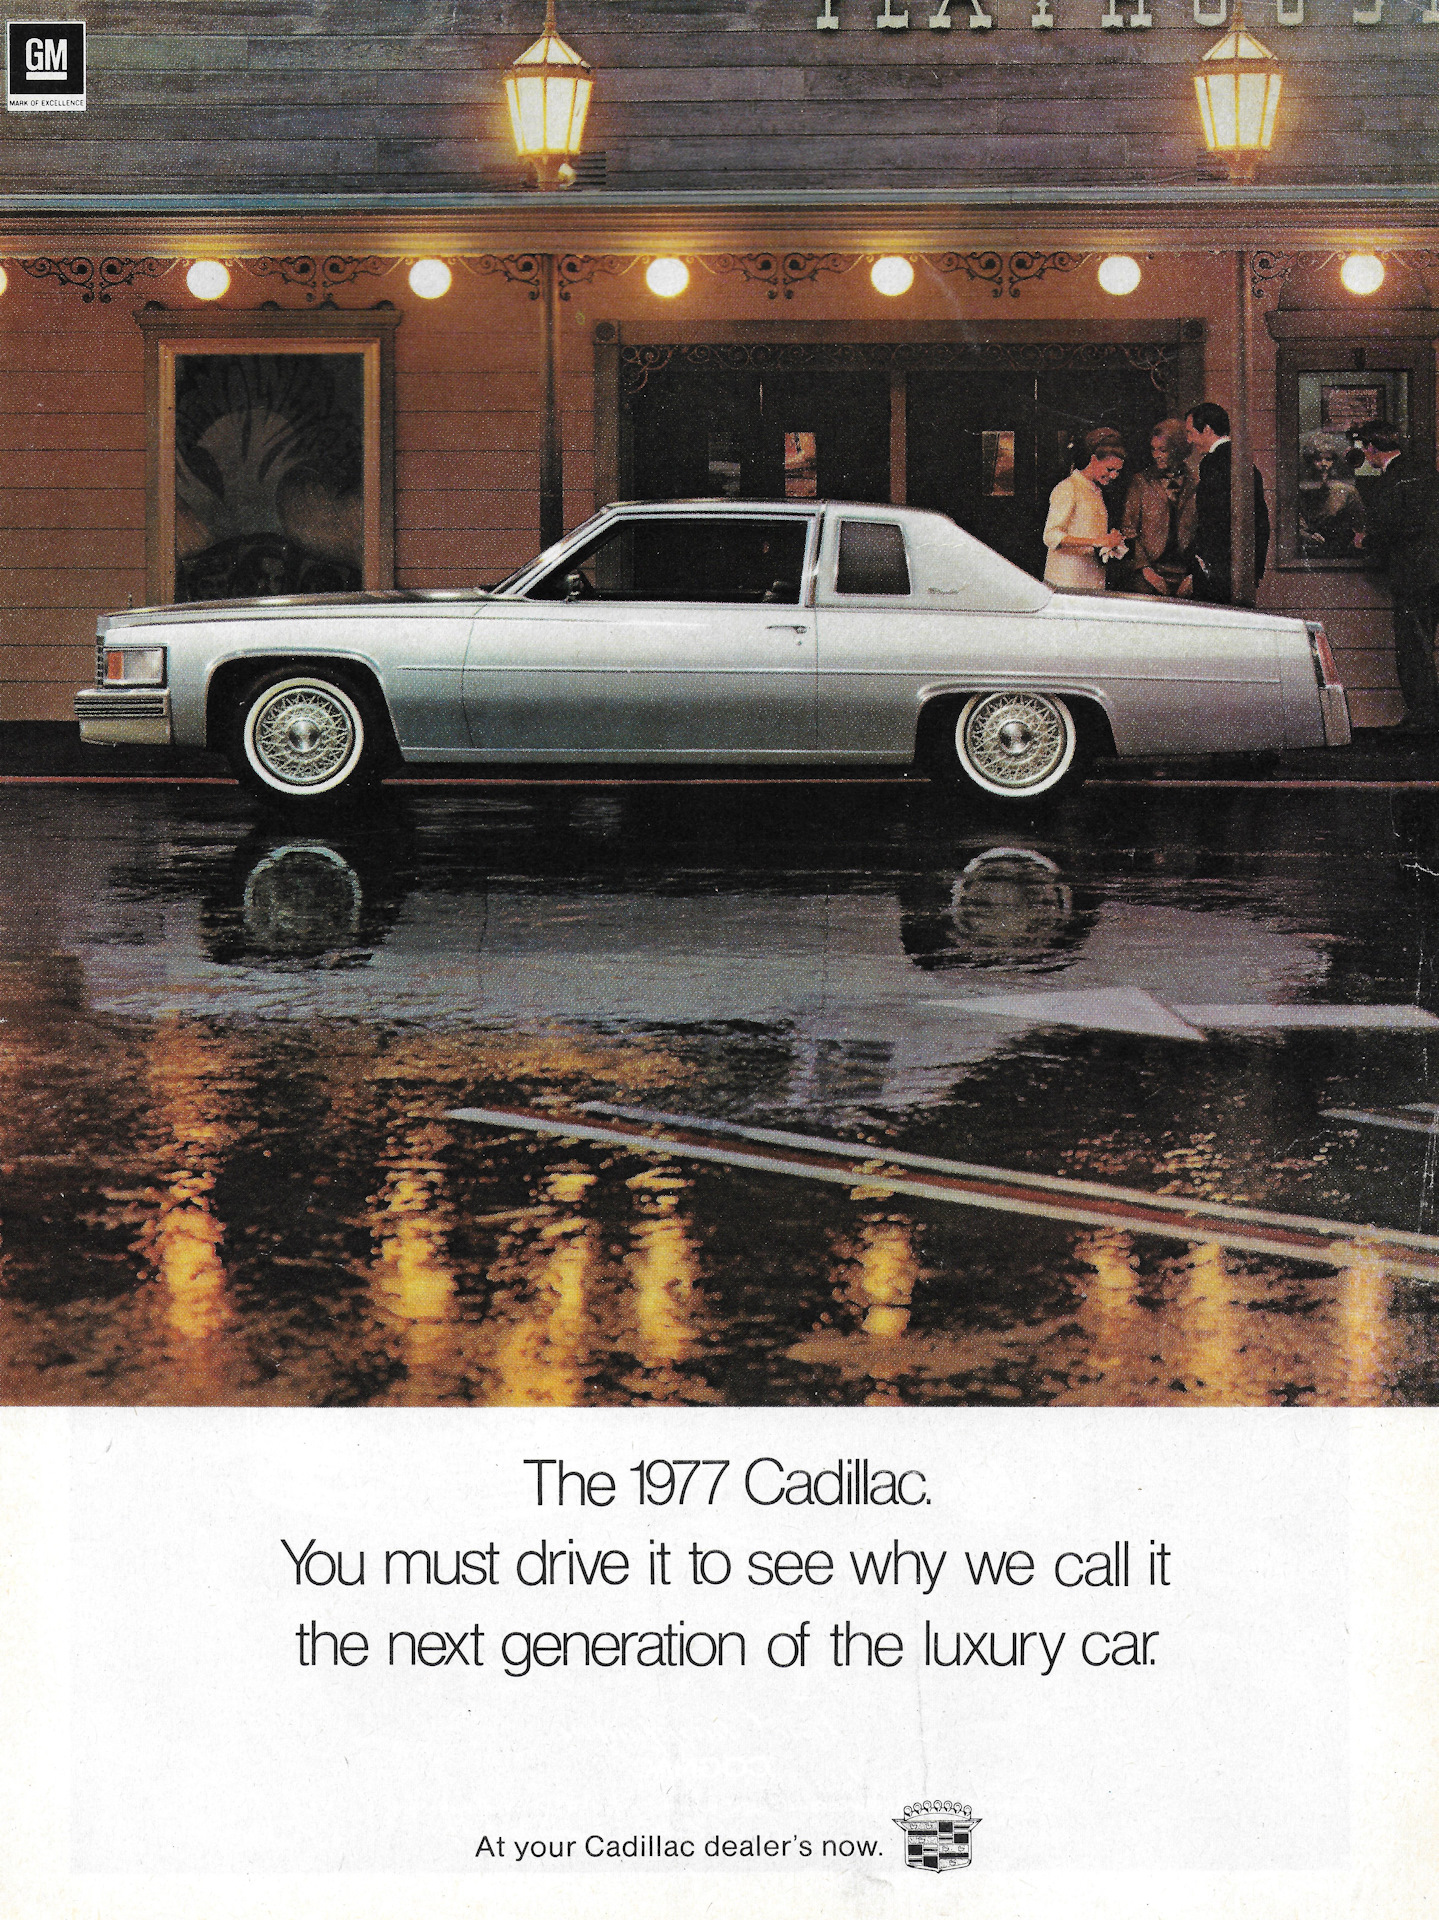 Cadillac 1977. You must to drive